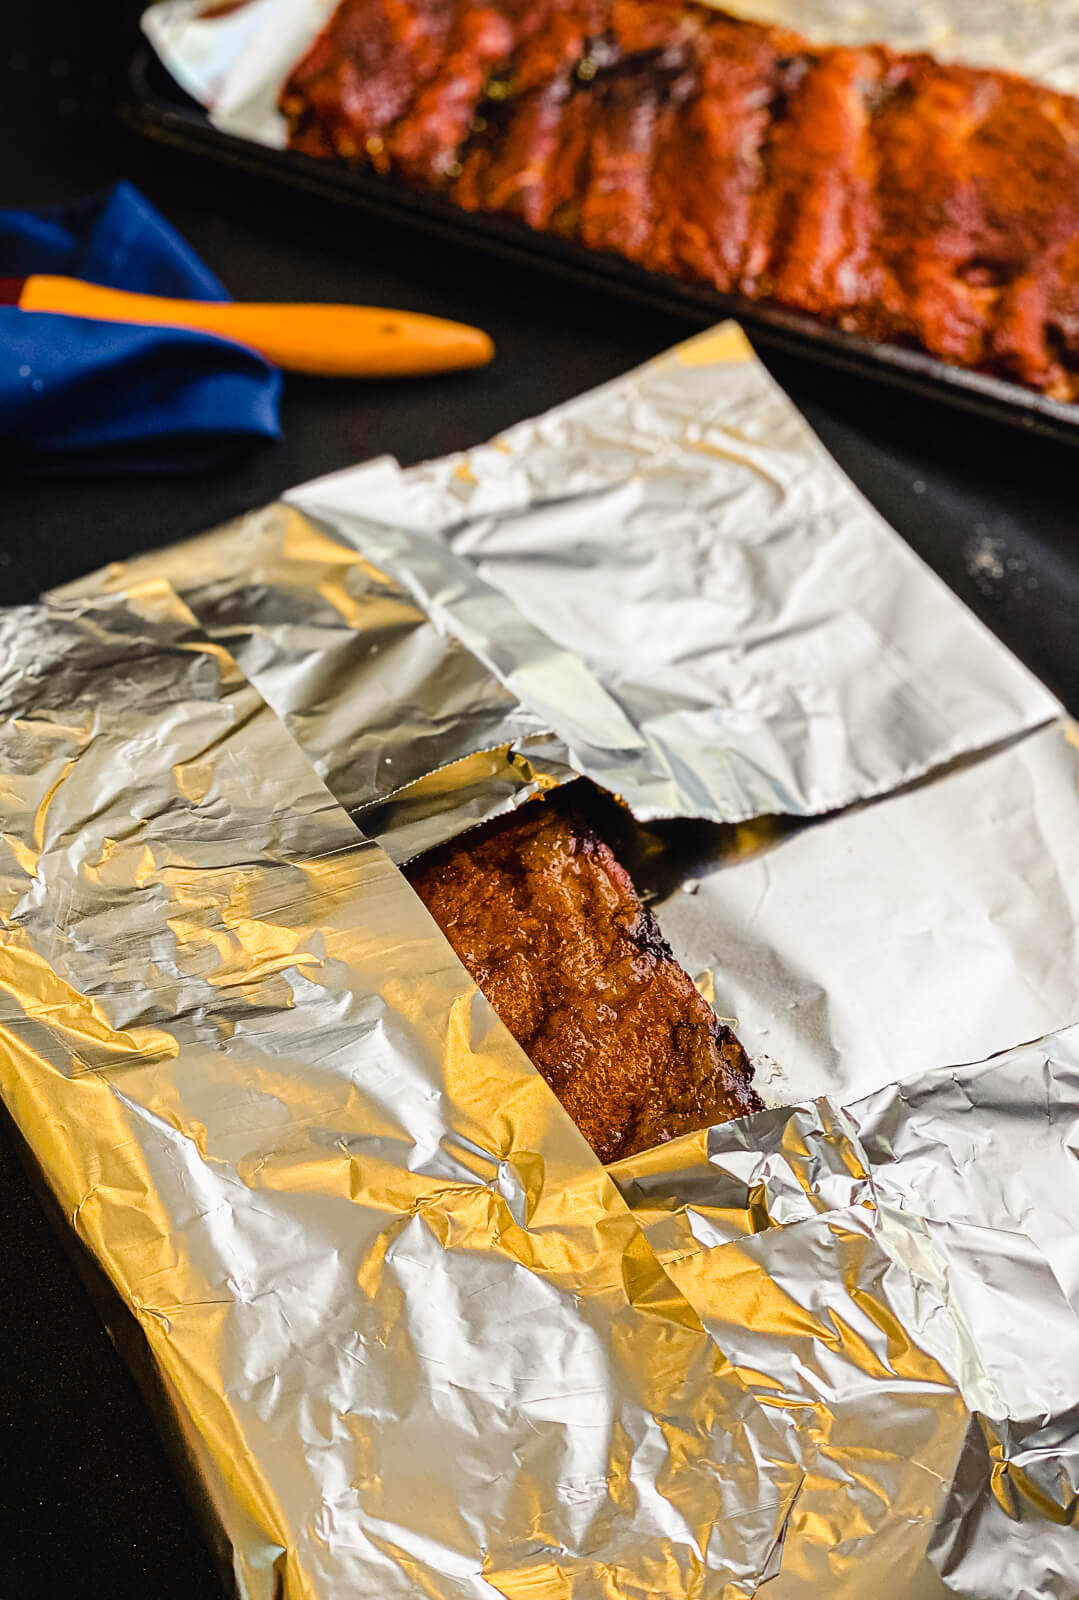 pork ribs being wrapped in foil